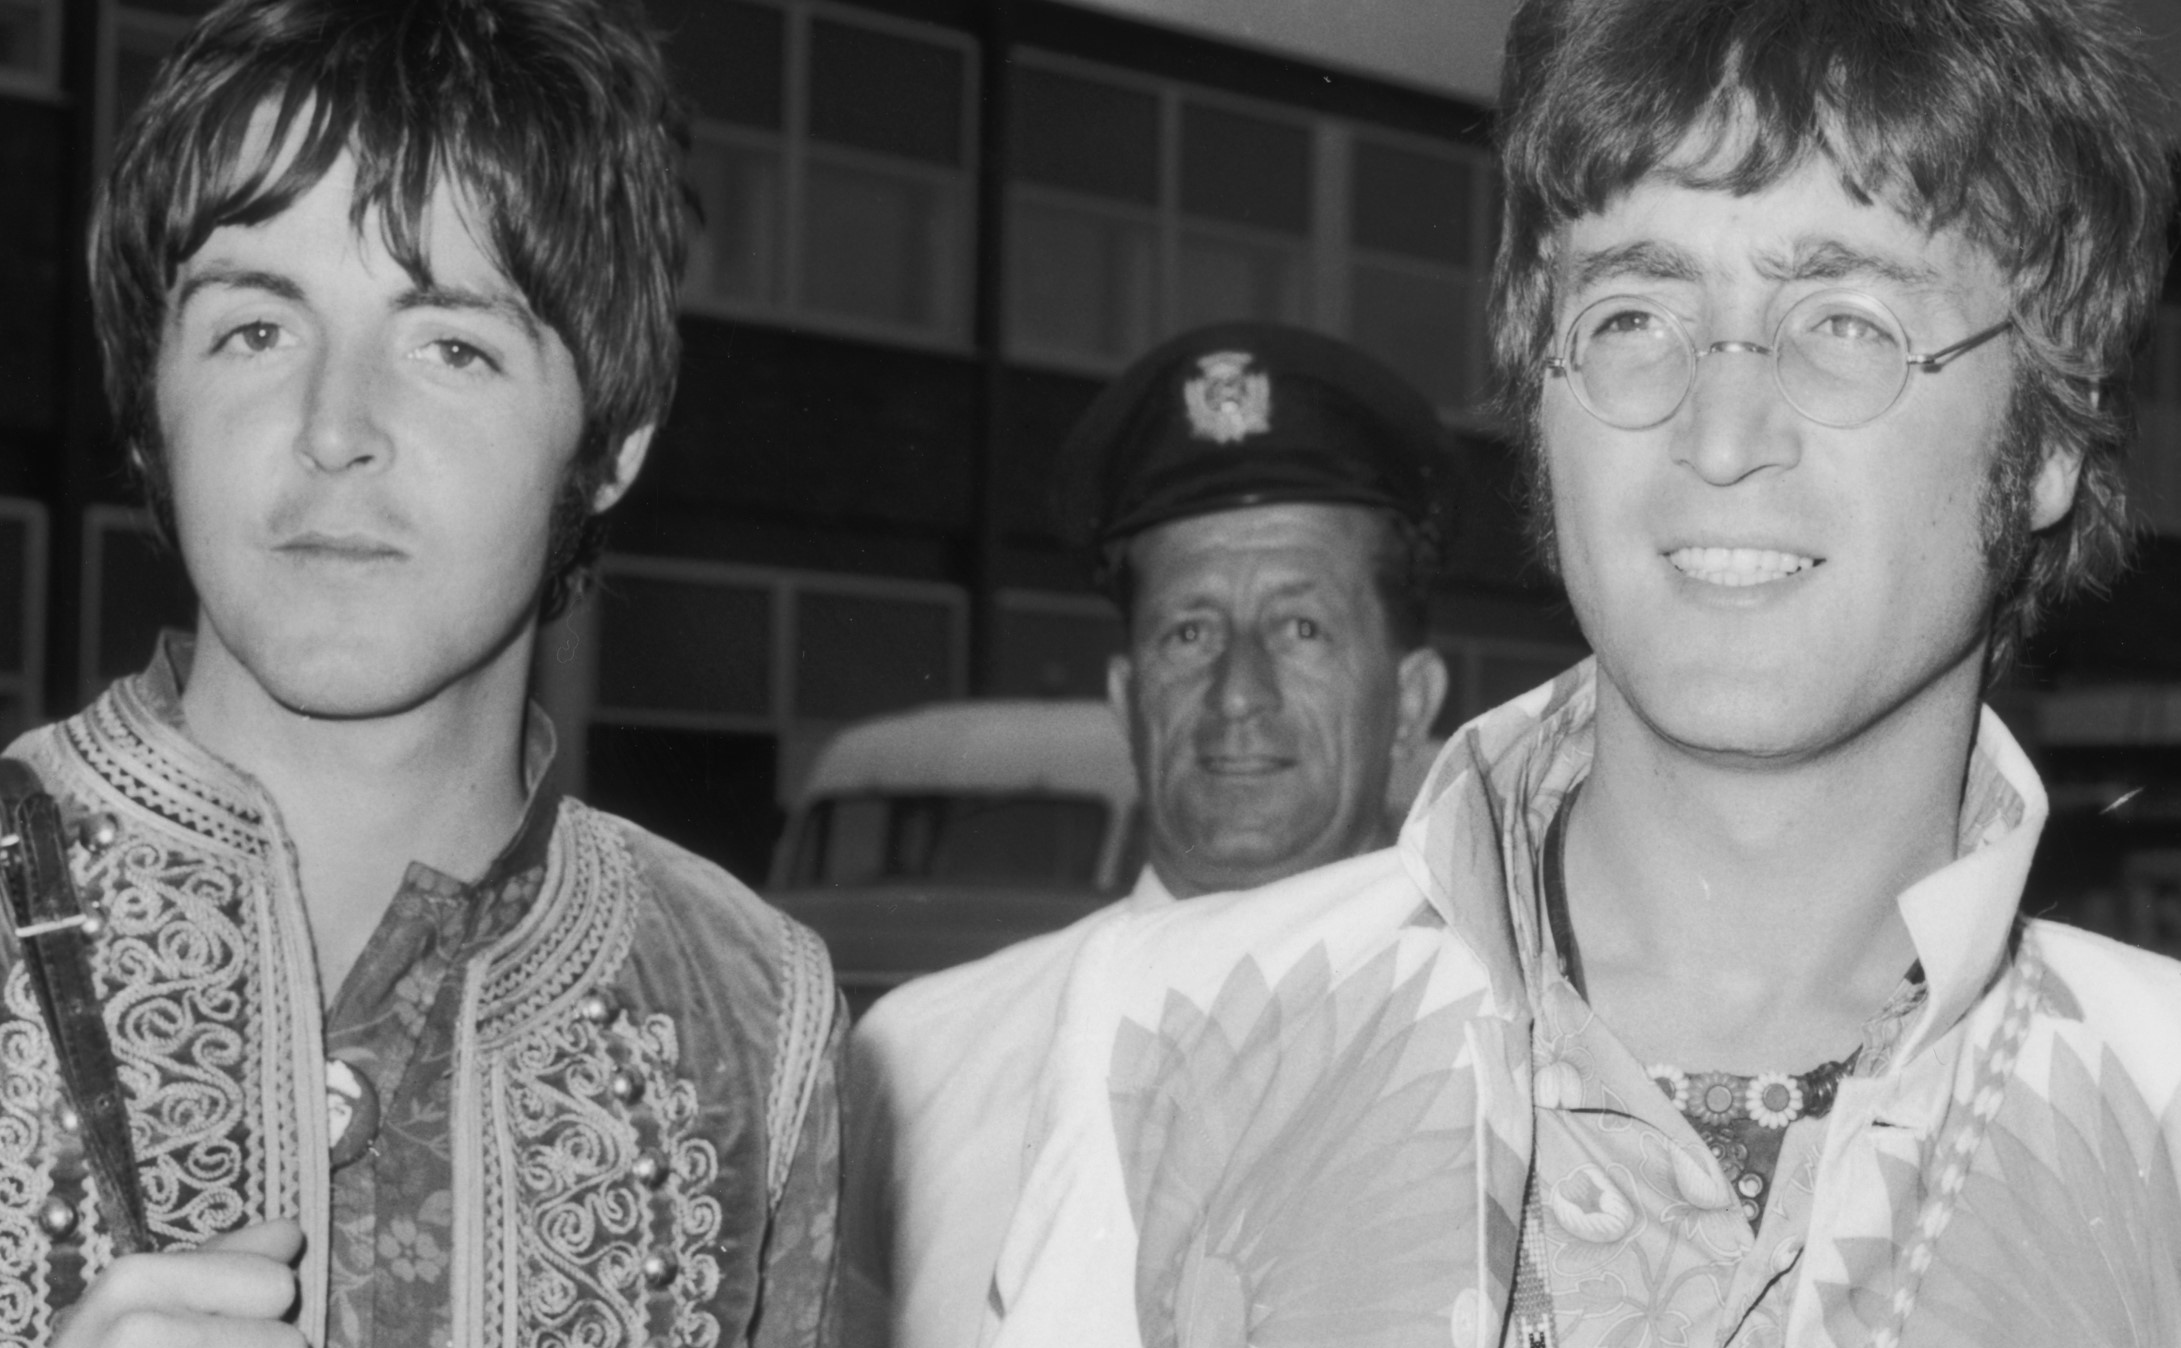 You are currently viewing 1 John Lennon Album Made Paul McCartney Feel ‘Competitive’